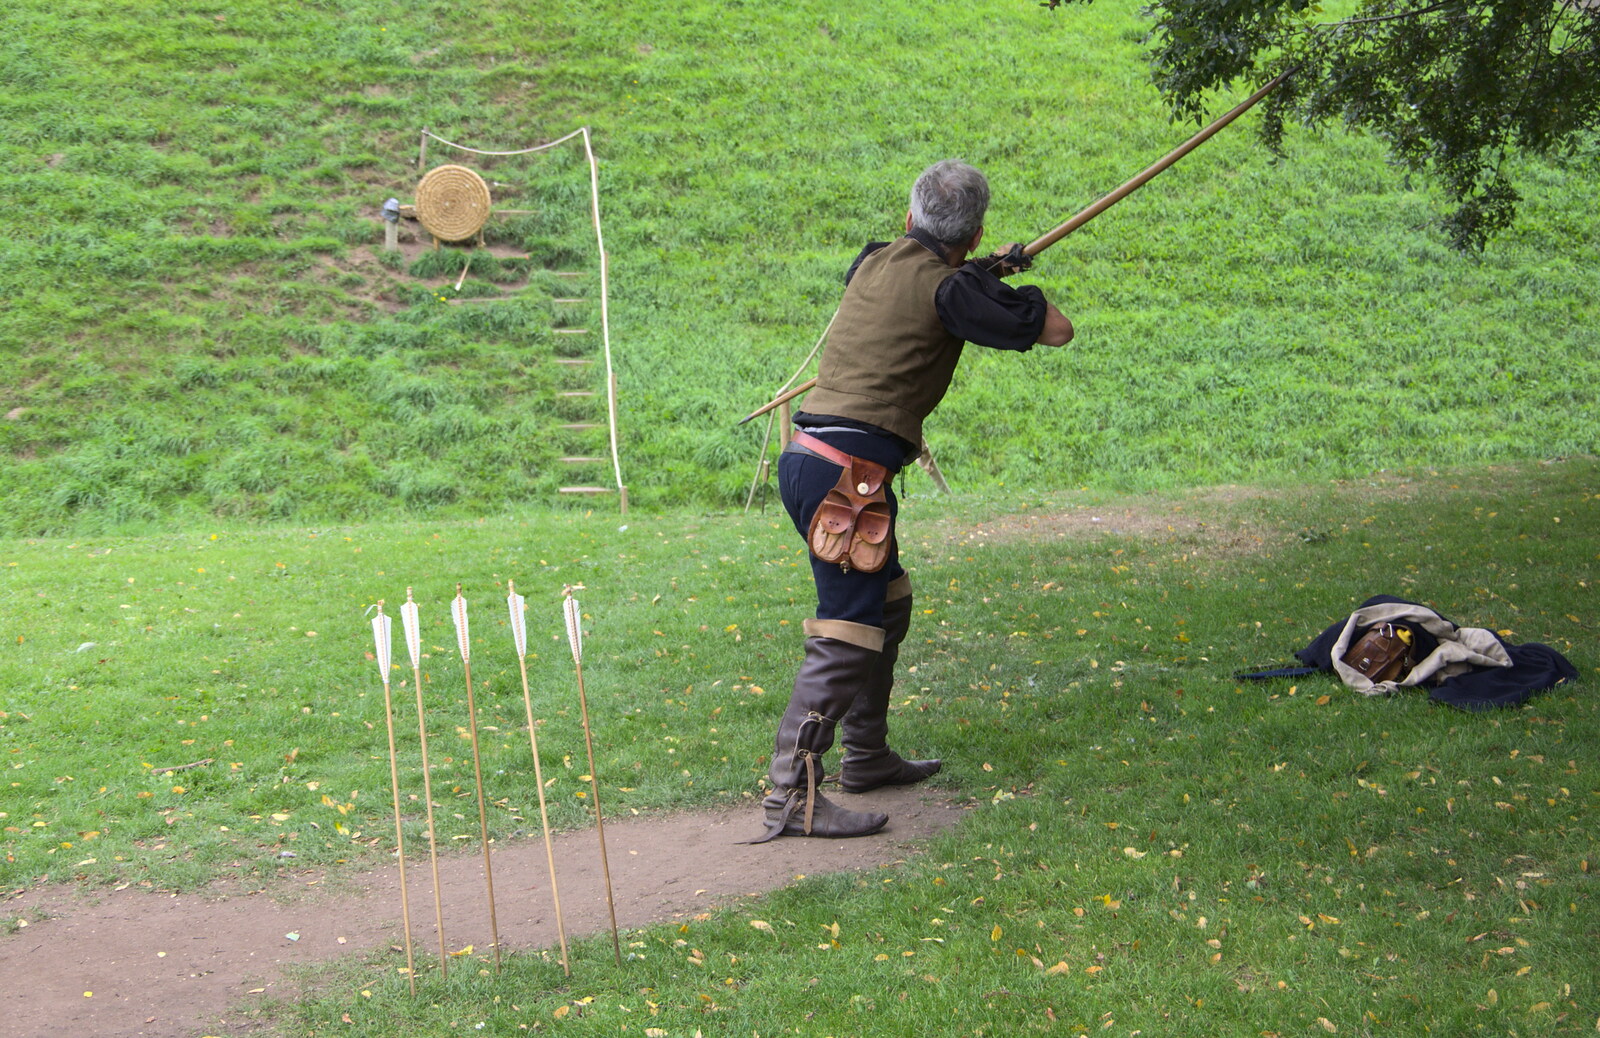 A demonstration of archery from A Day at Warwick Castle, Warwickshire - 8th September 2018